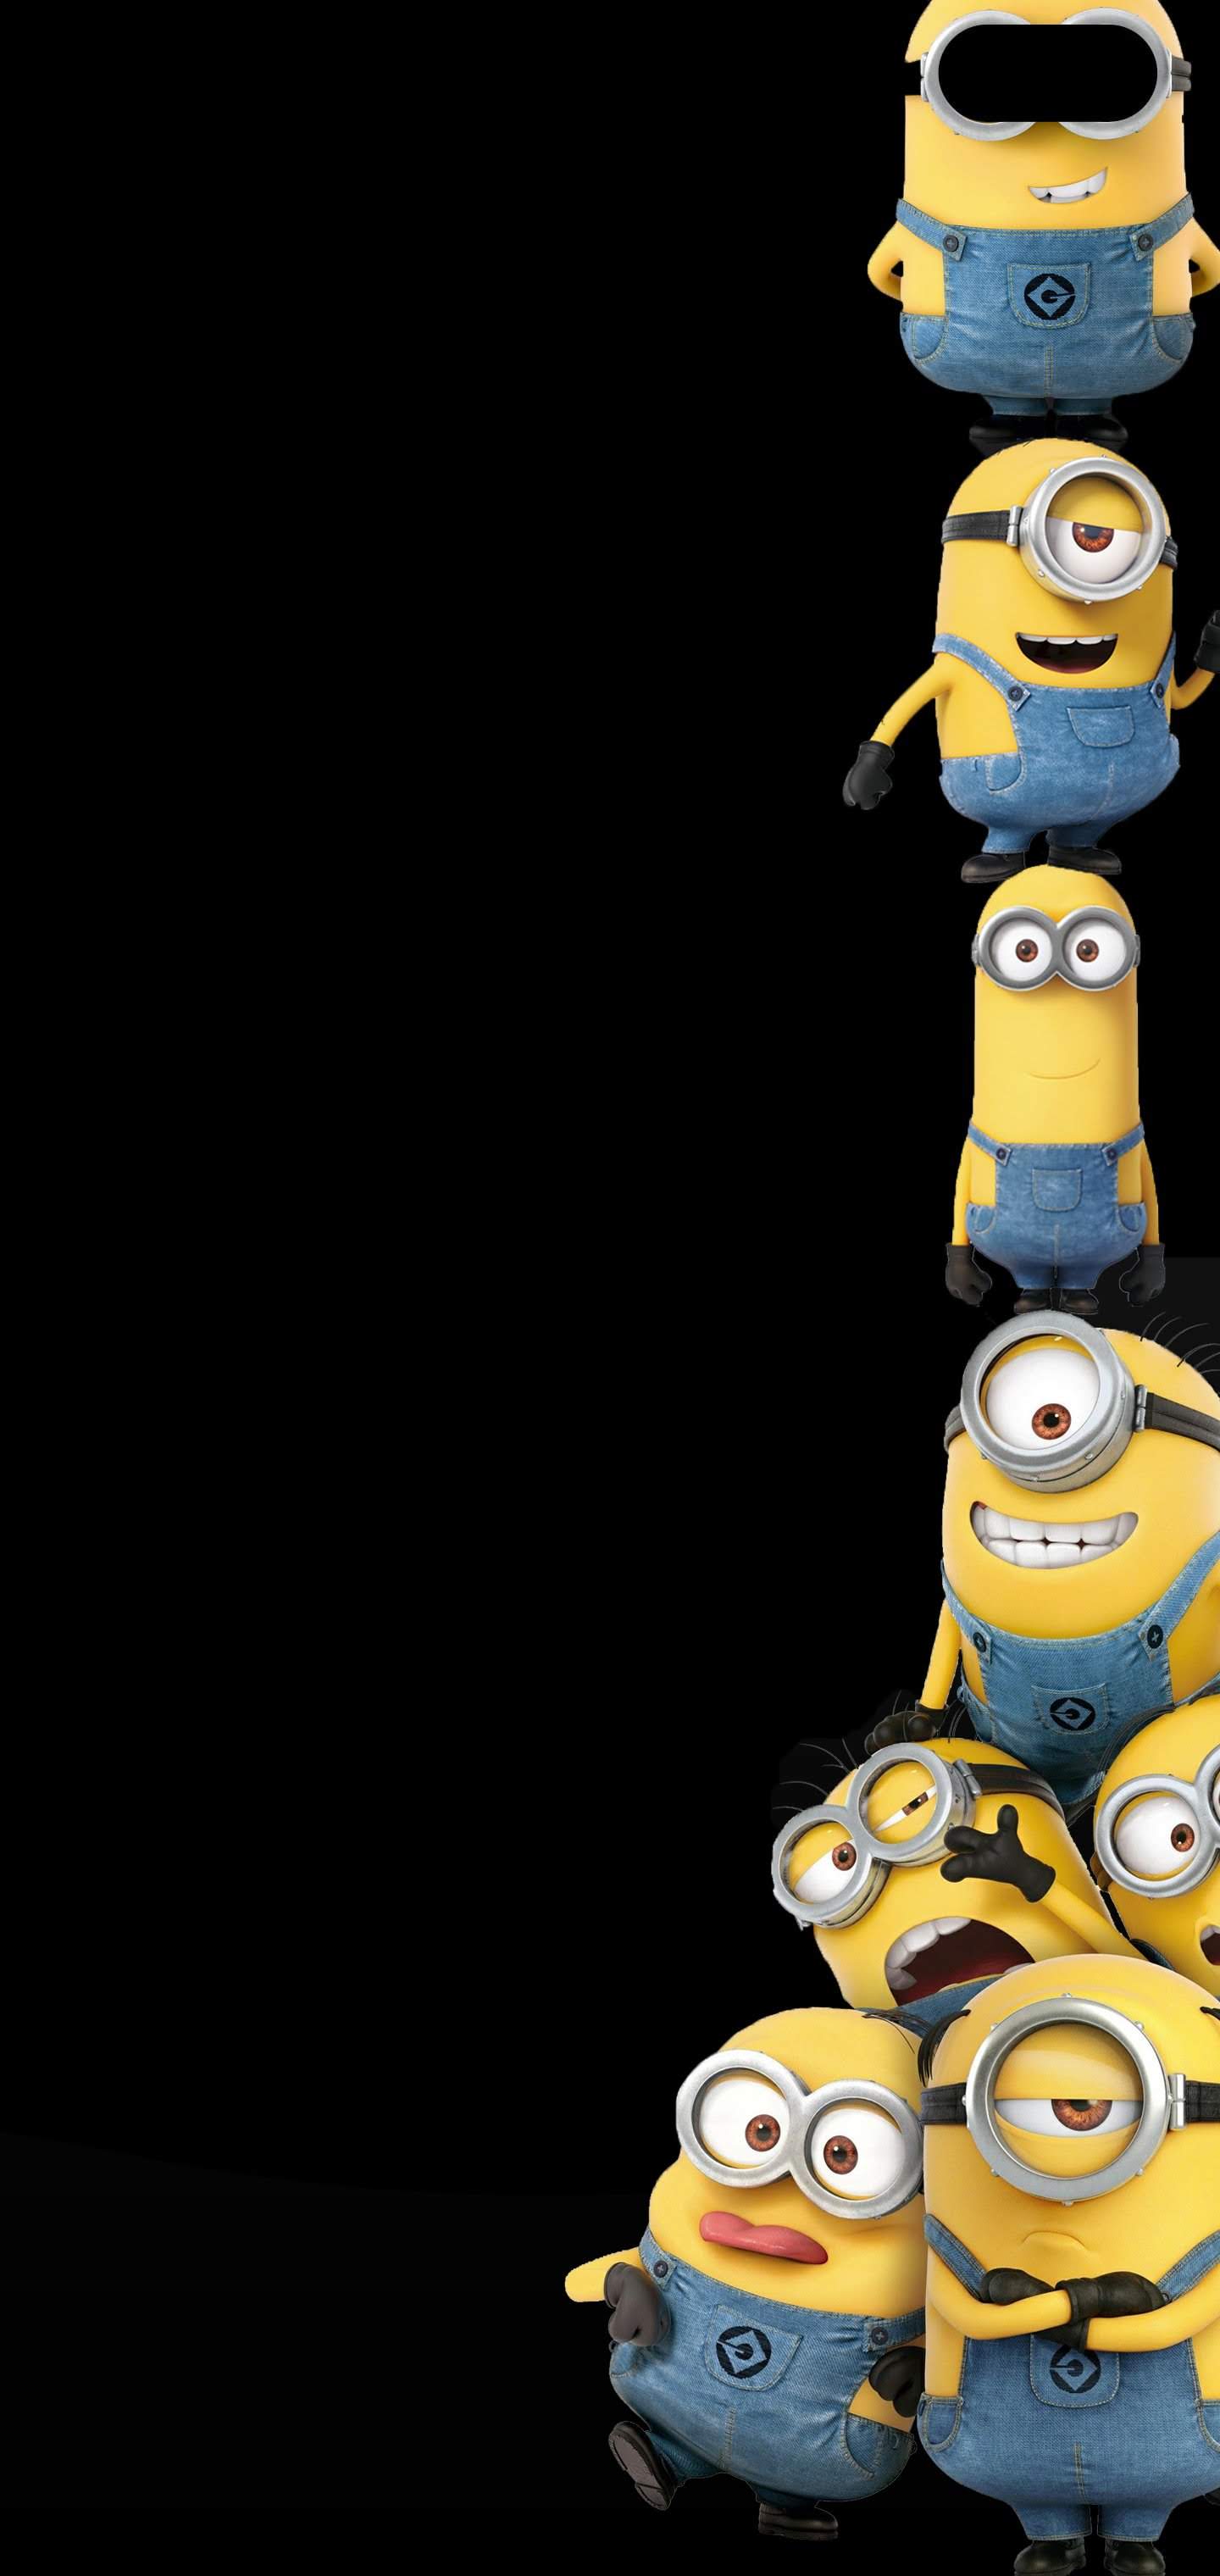 Stack Of Minions S10 Galaxy S10 Hole Punch Wallpaper